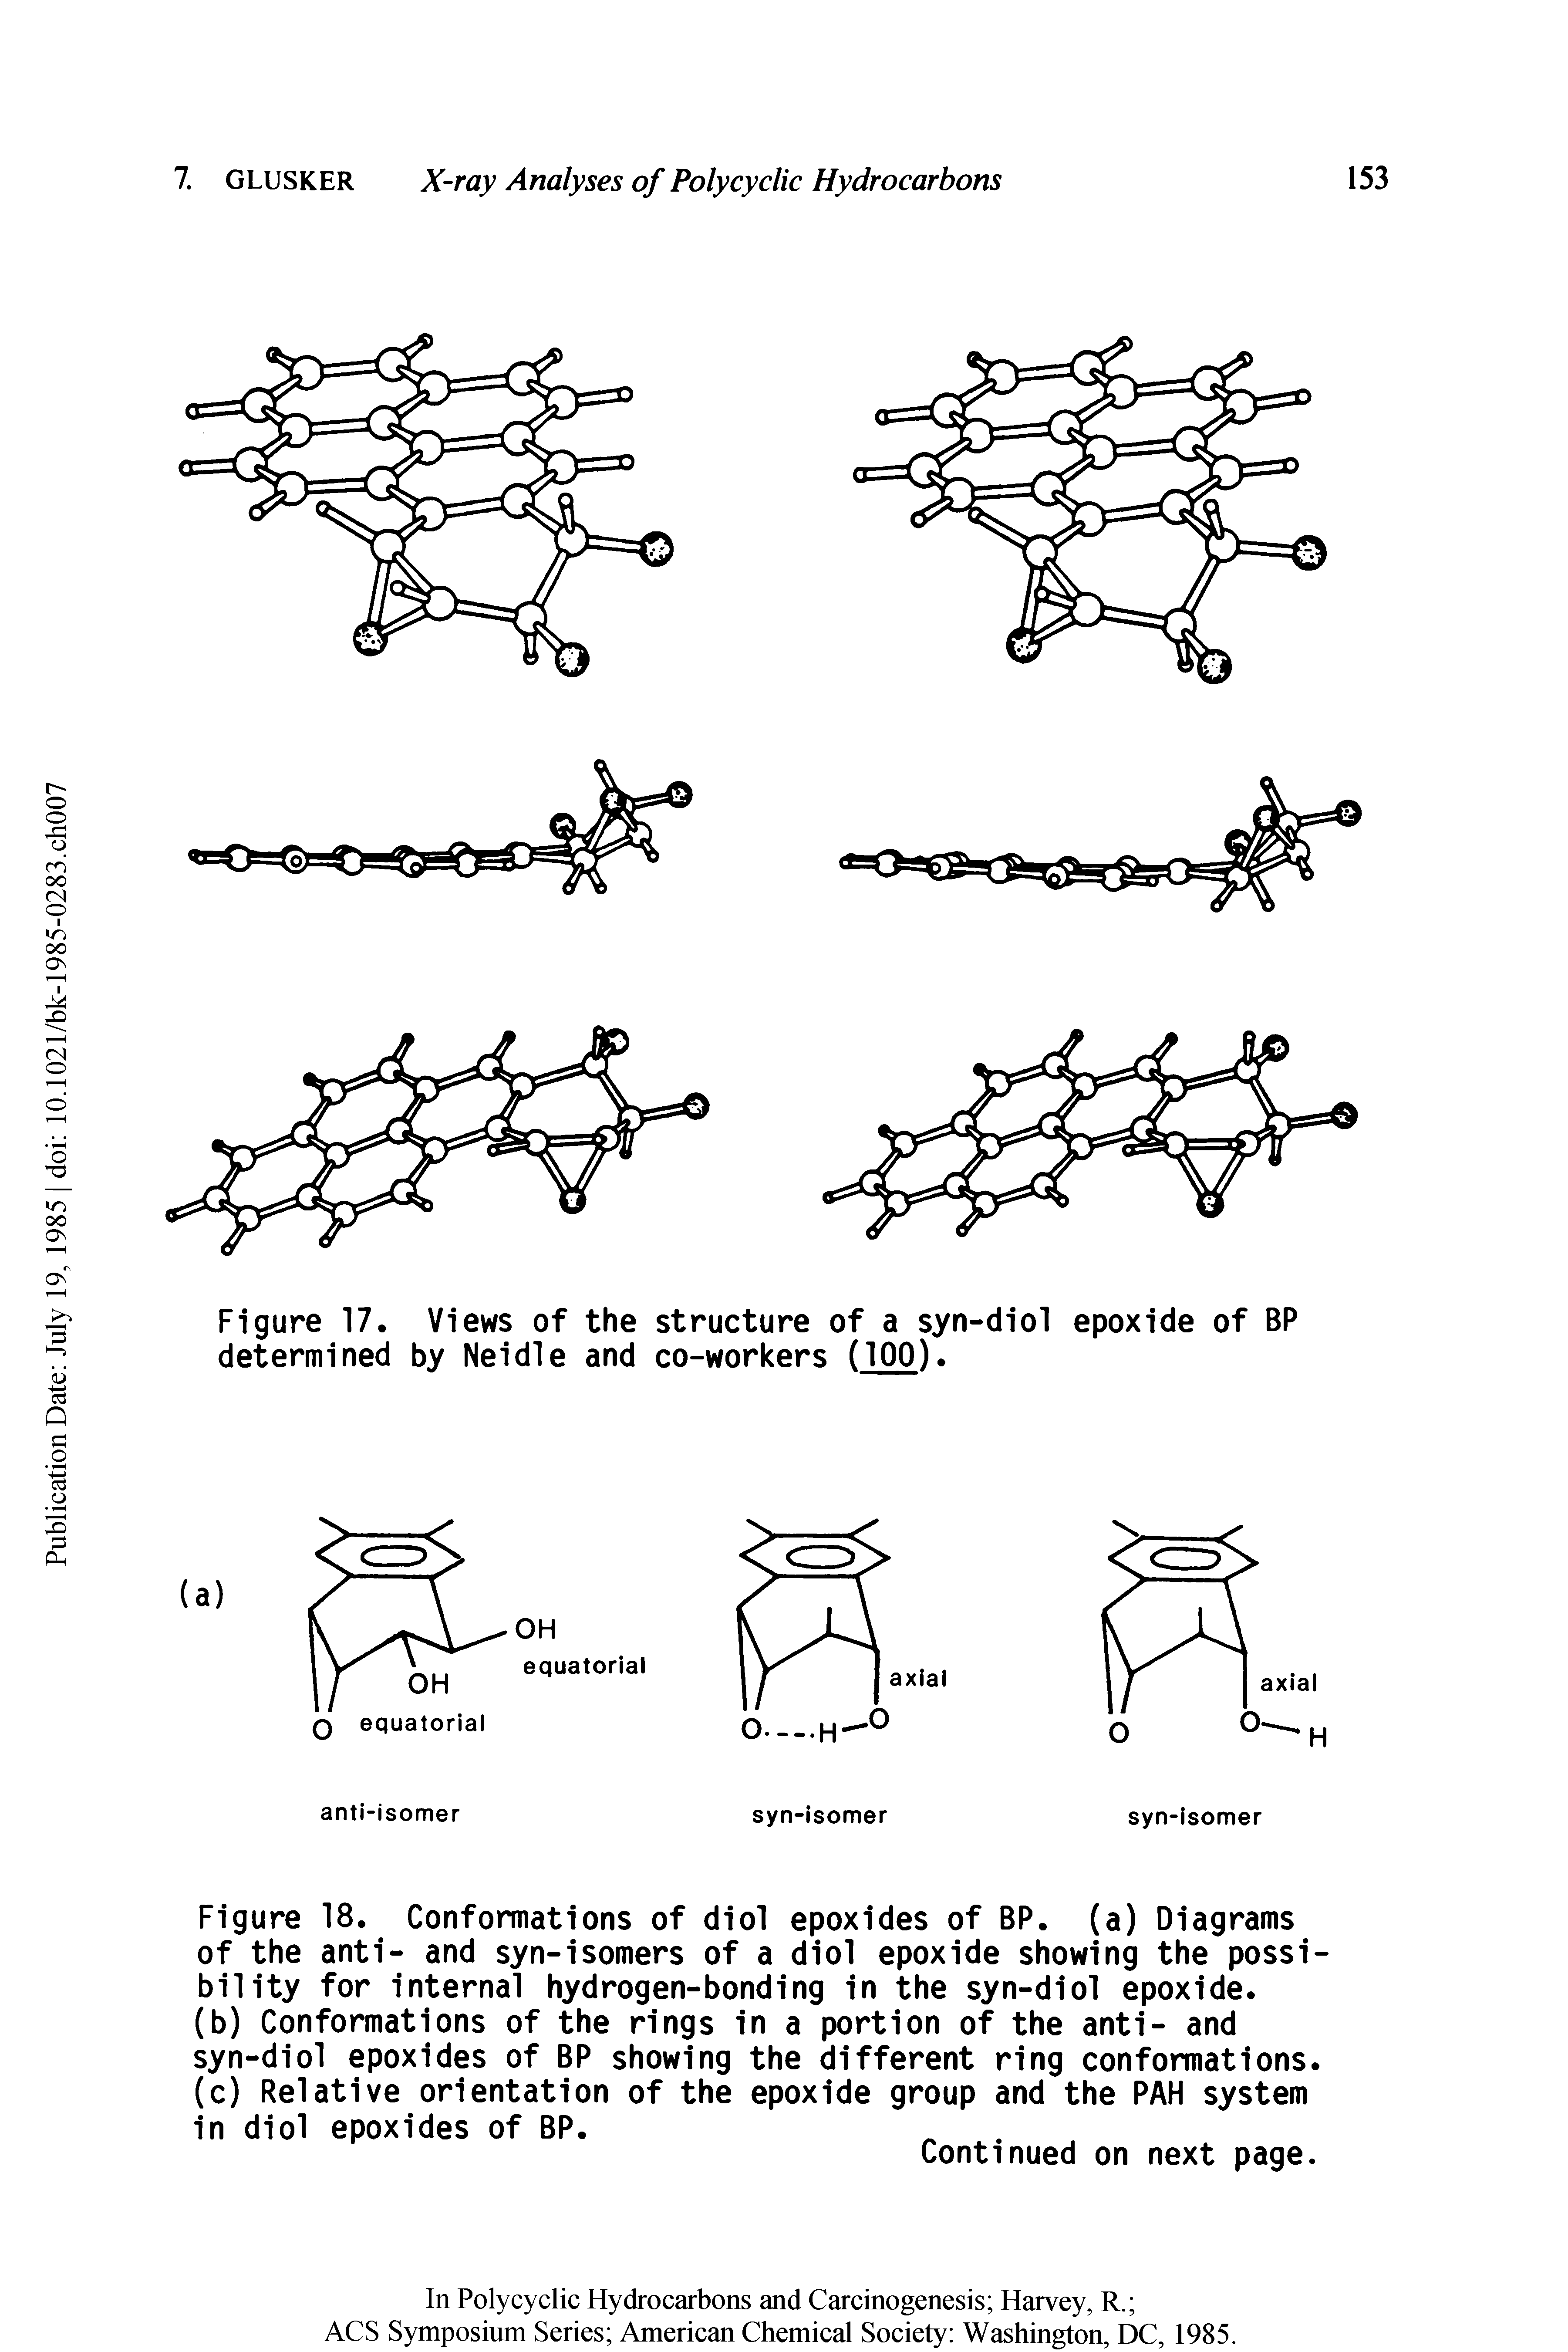 Figure 18. Conformations of diol epoxides of BP. (a) Diagrams of the anti- and syn-isomers of a diol epoxide showing the possibility for internal hydrogen-bonding in the syn-diol epoxide.